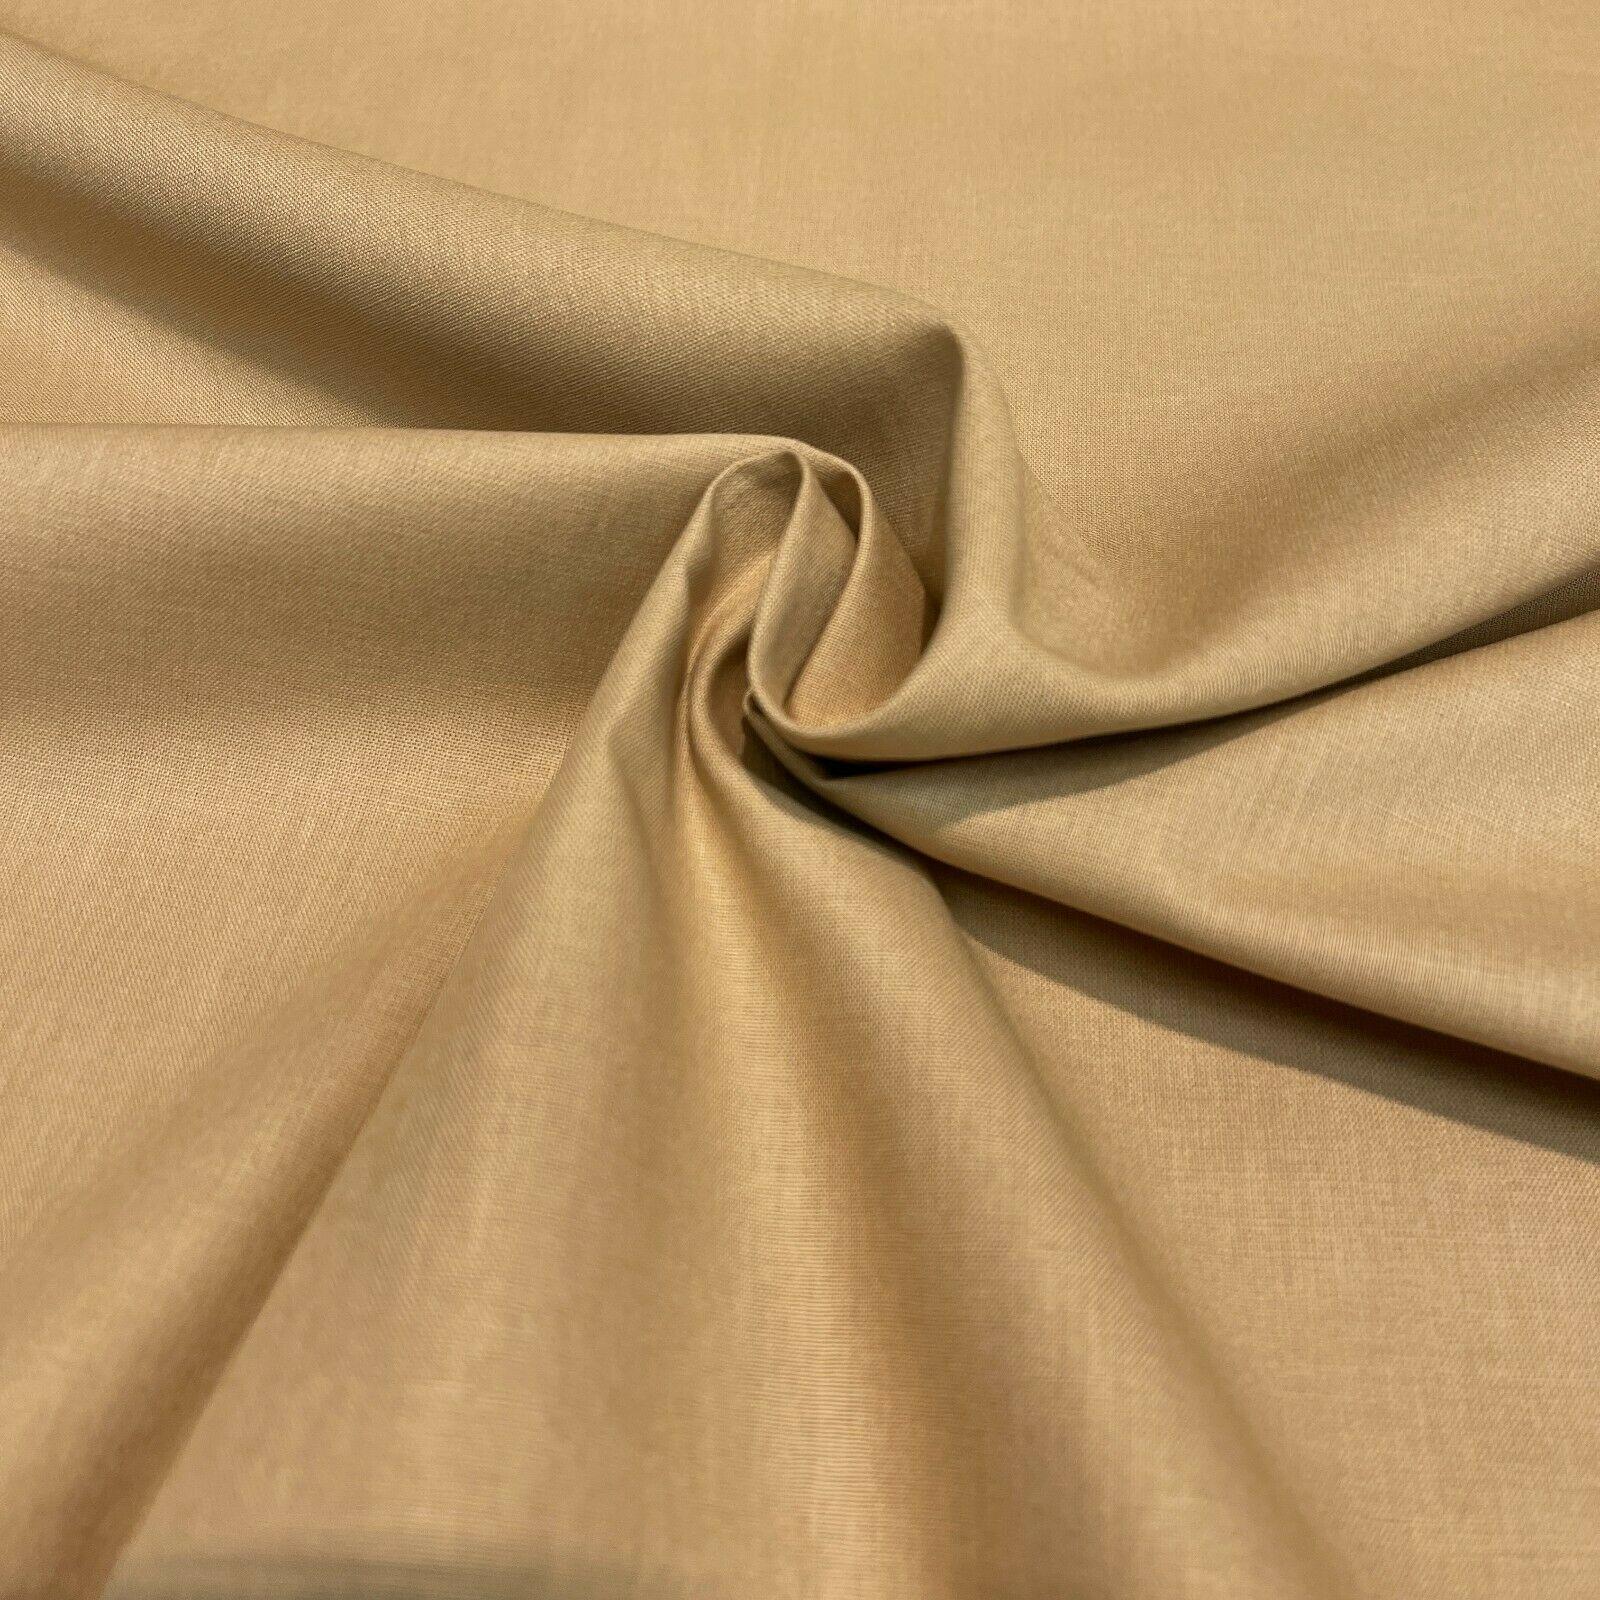 Plain dyed 100% Crafting Cotton Sheeting Fabric M1578